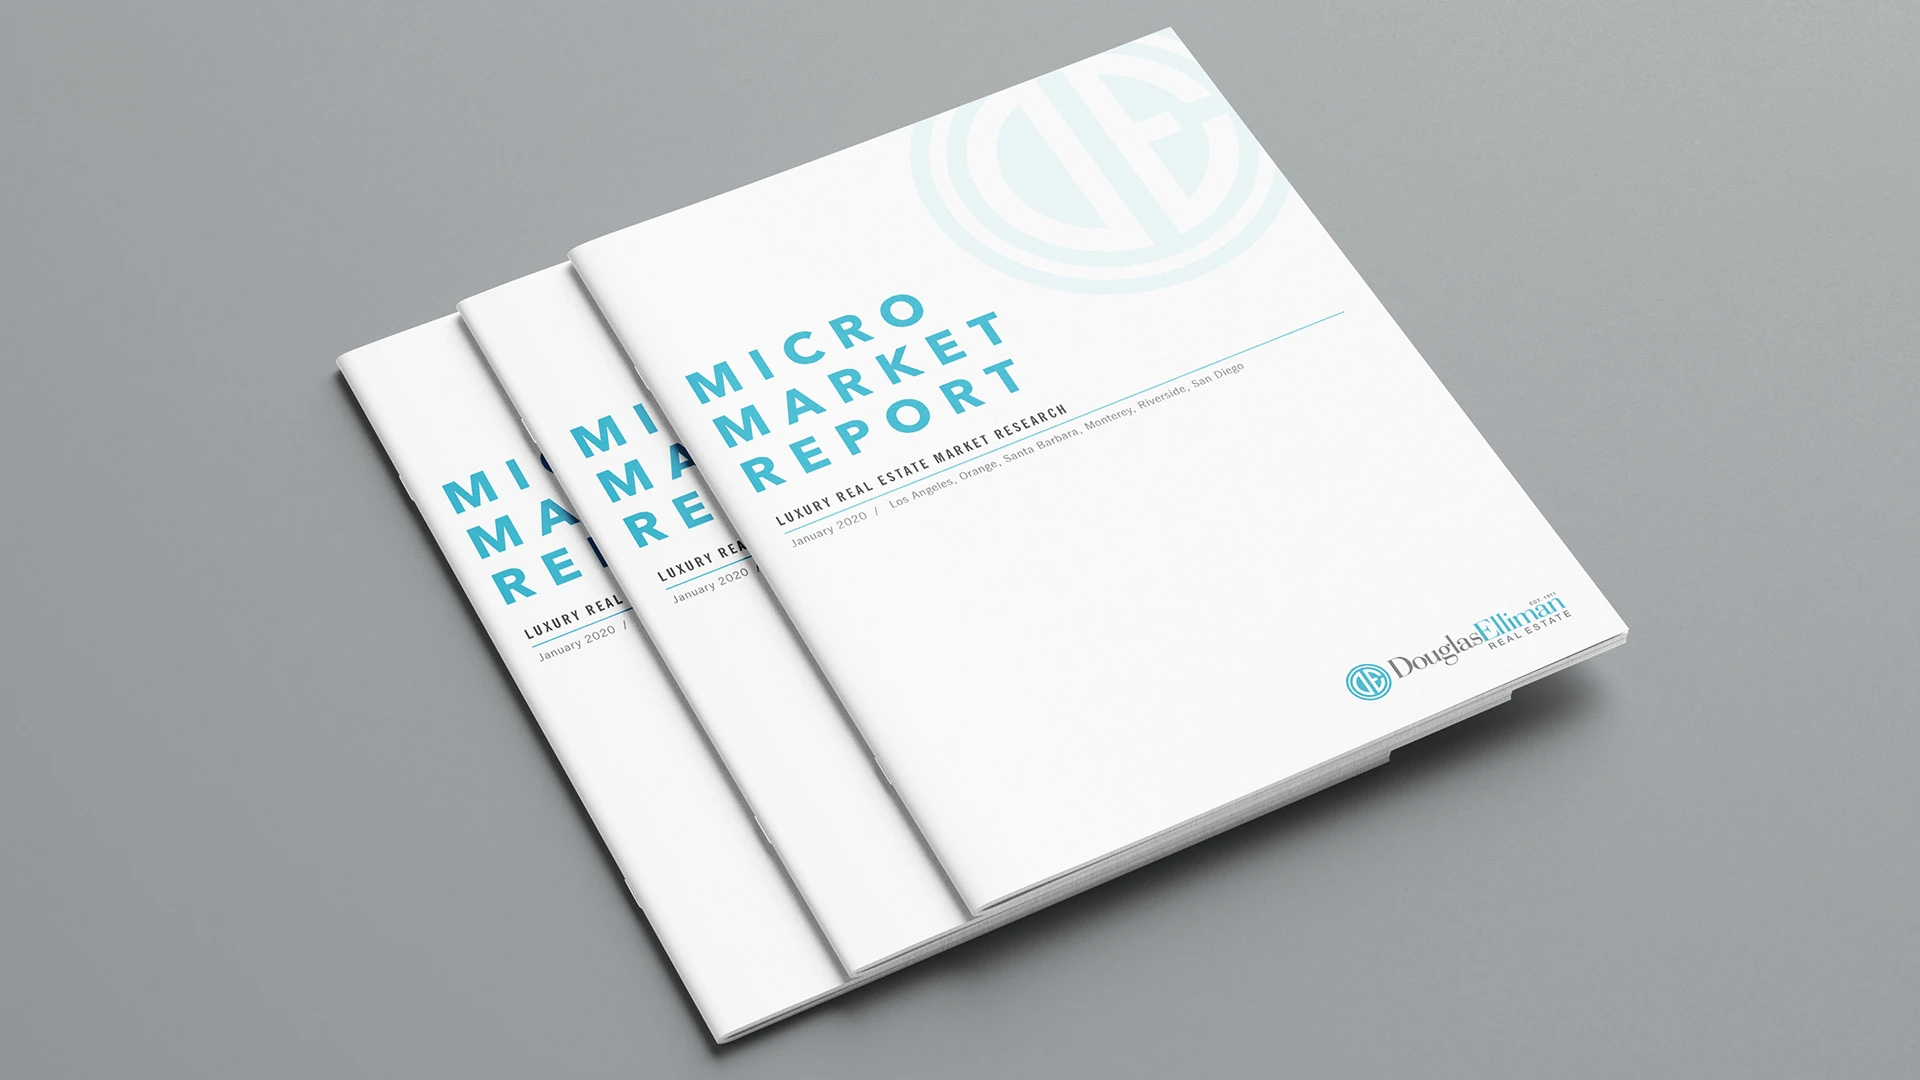 A mockup of three Micro Market Reports, using the 2019-early 2020 design, showing the covers.